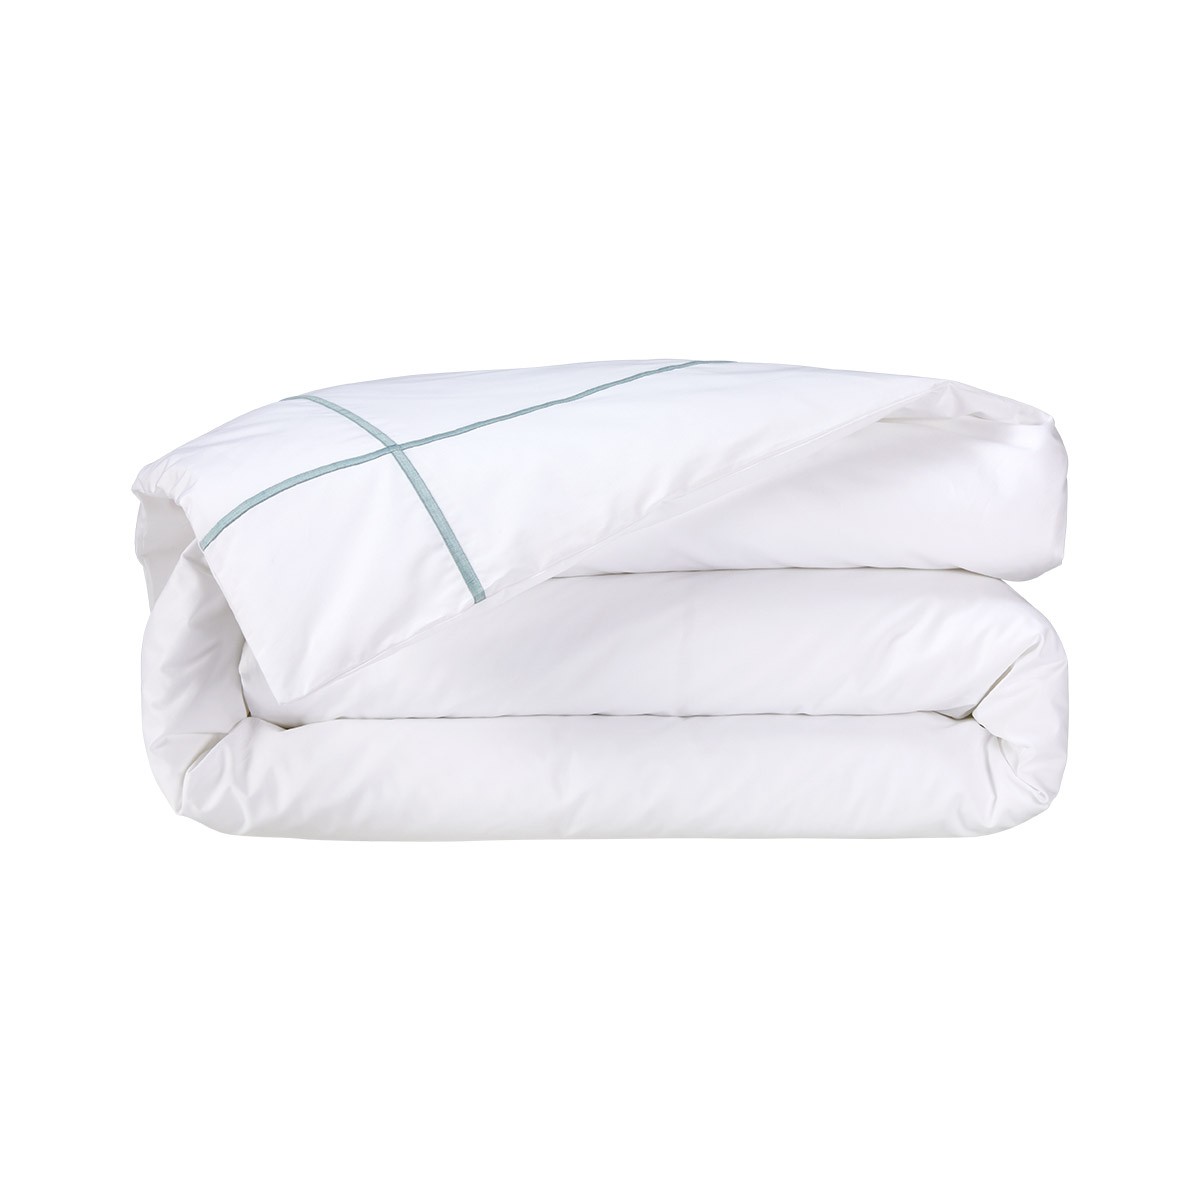 Premium Percale Sheets: Yves Delorme Outlet's Athena Bed Collection